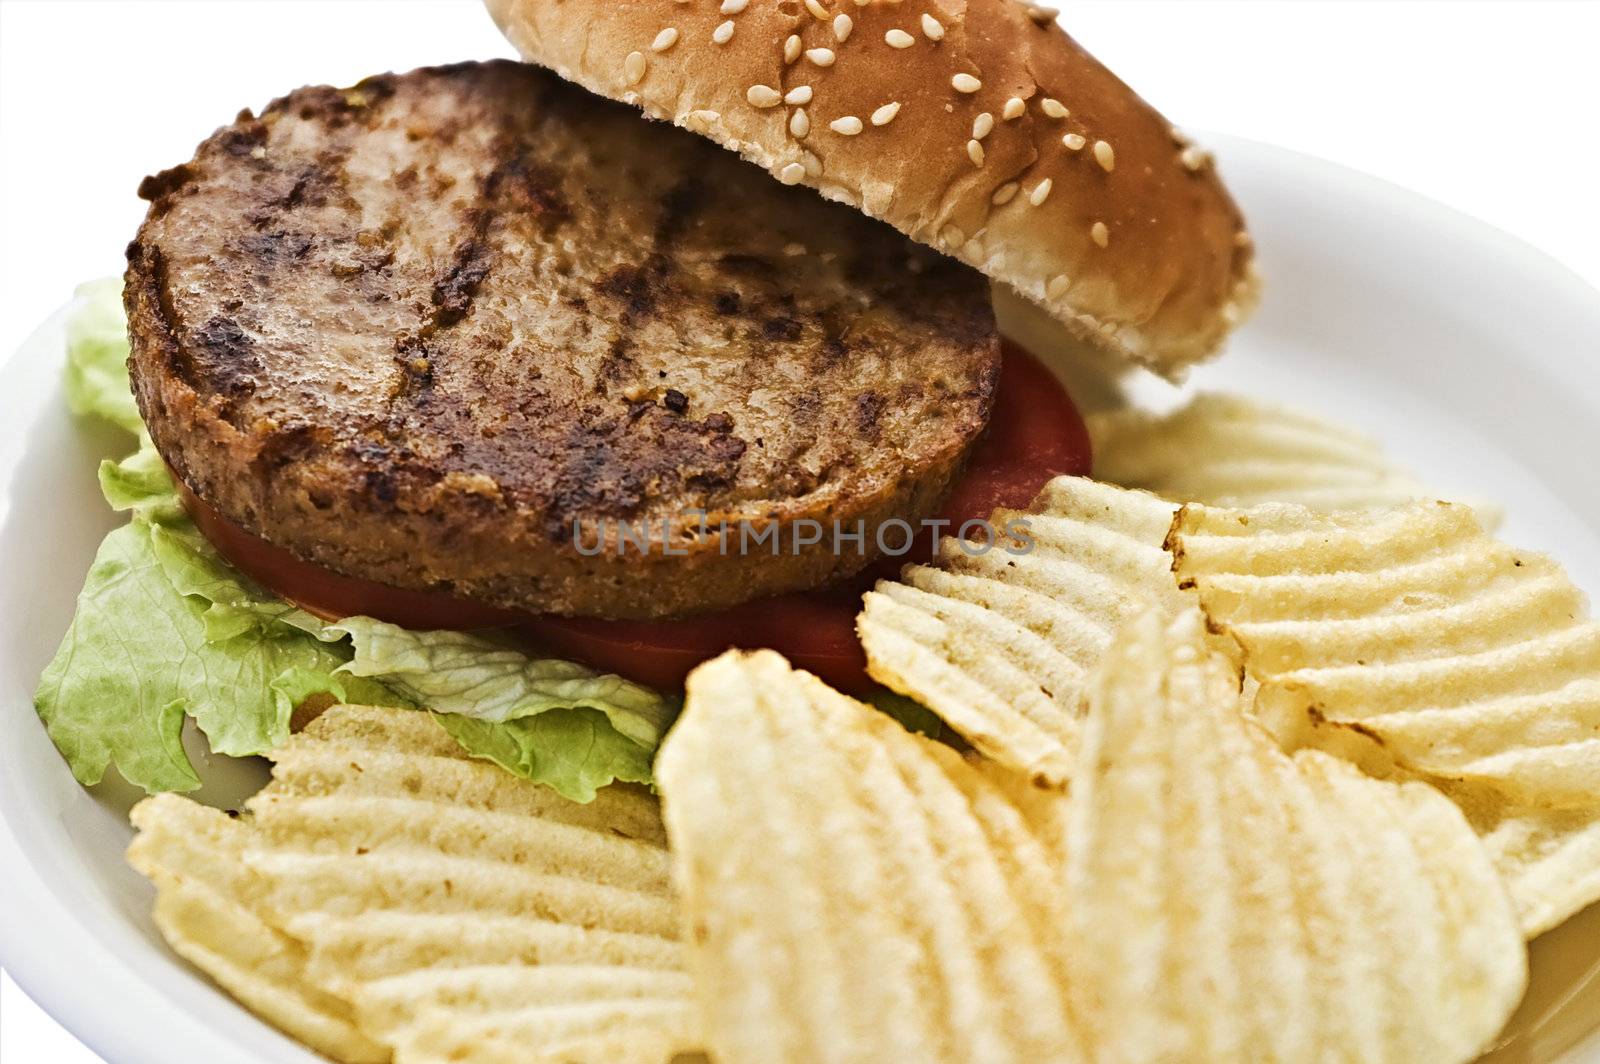 Vegetarian burger with chips on a styrofoam plate. Isolated on a white background